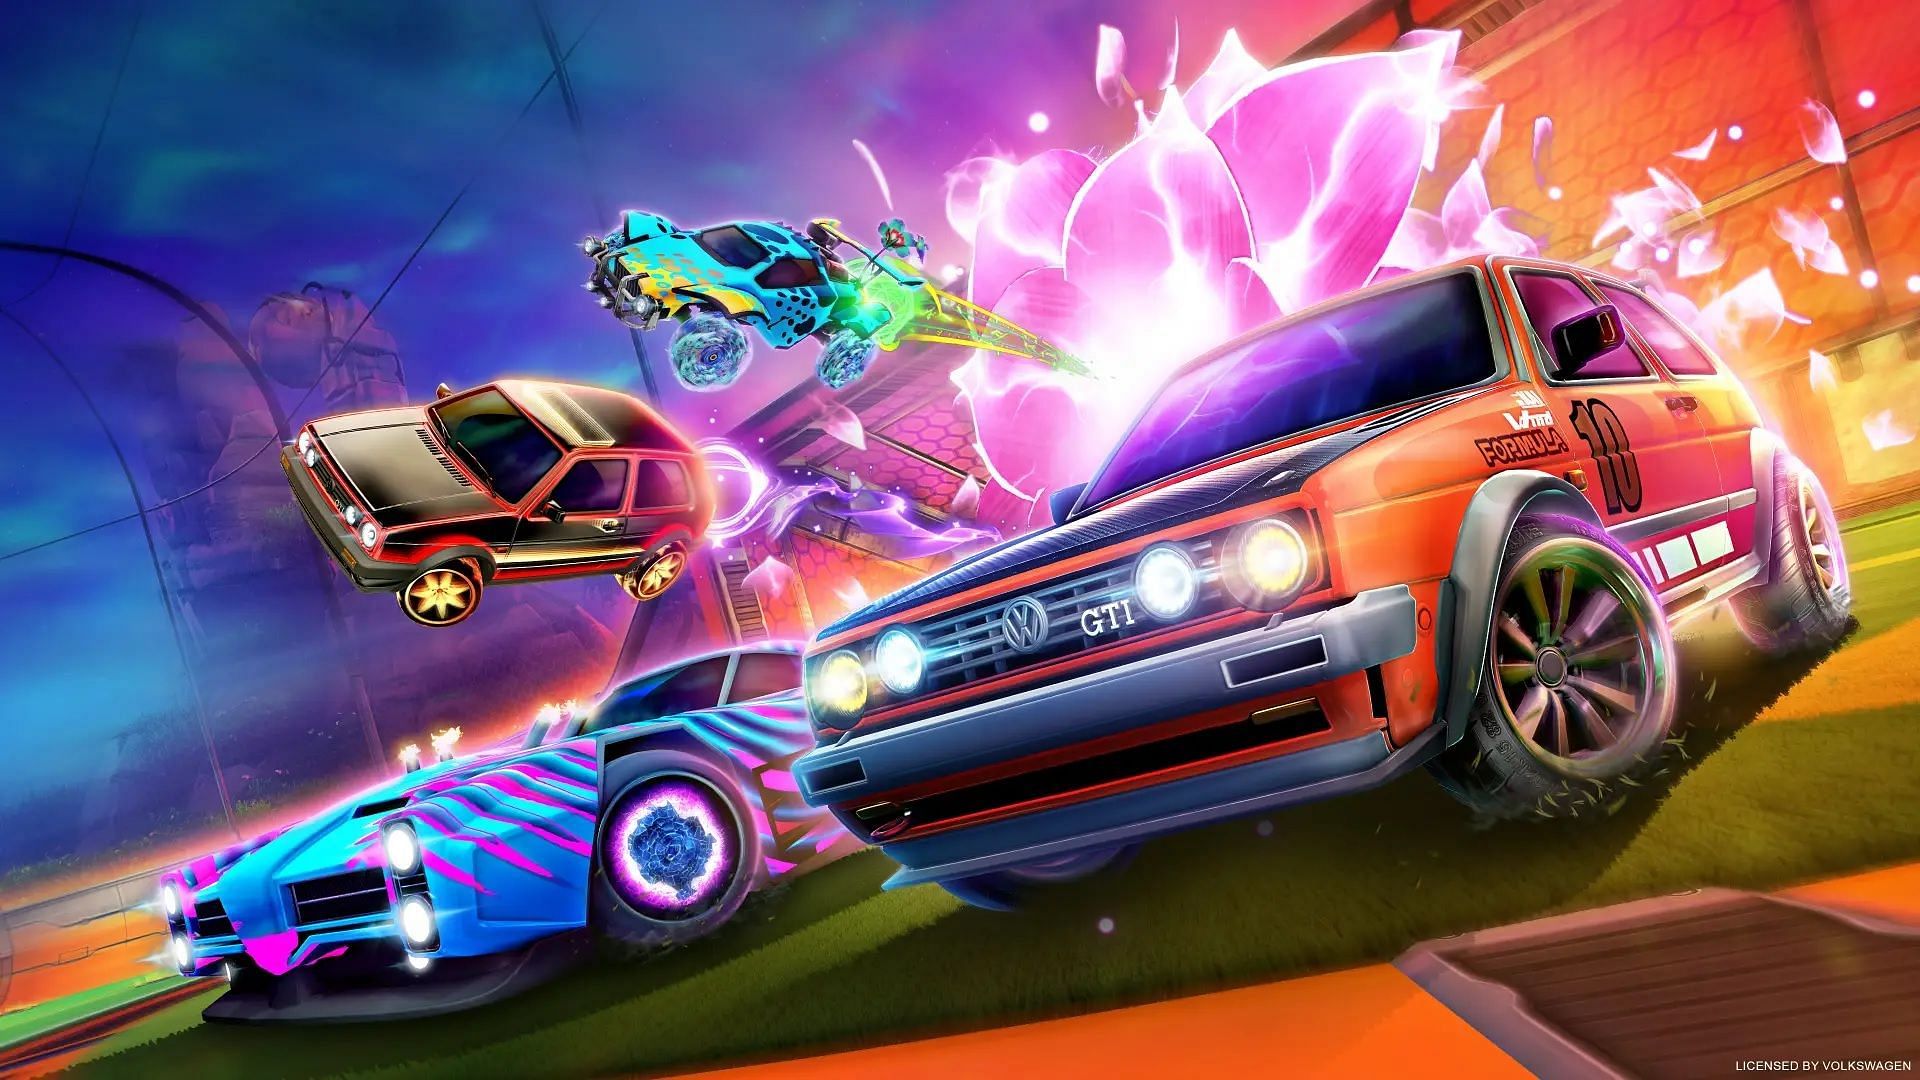 The Rocket Pass includes many cosmetic items and challenges for Fortnite Crew members (Image via Epic Games)